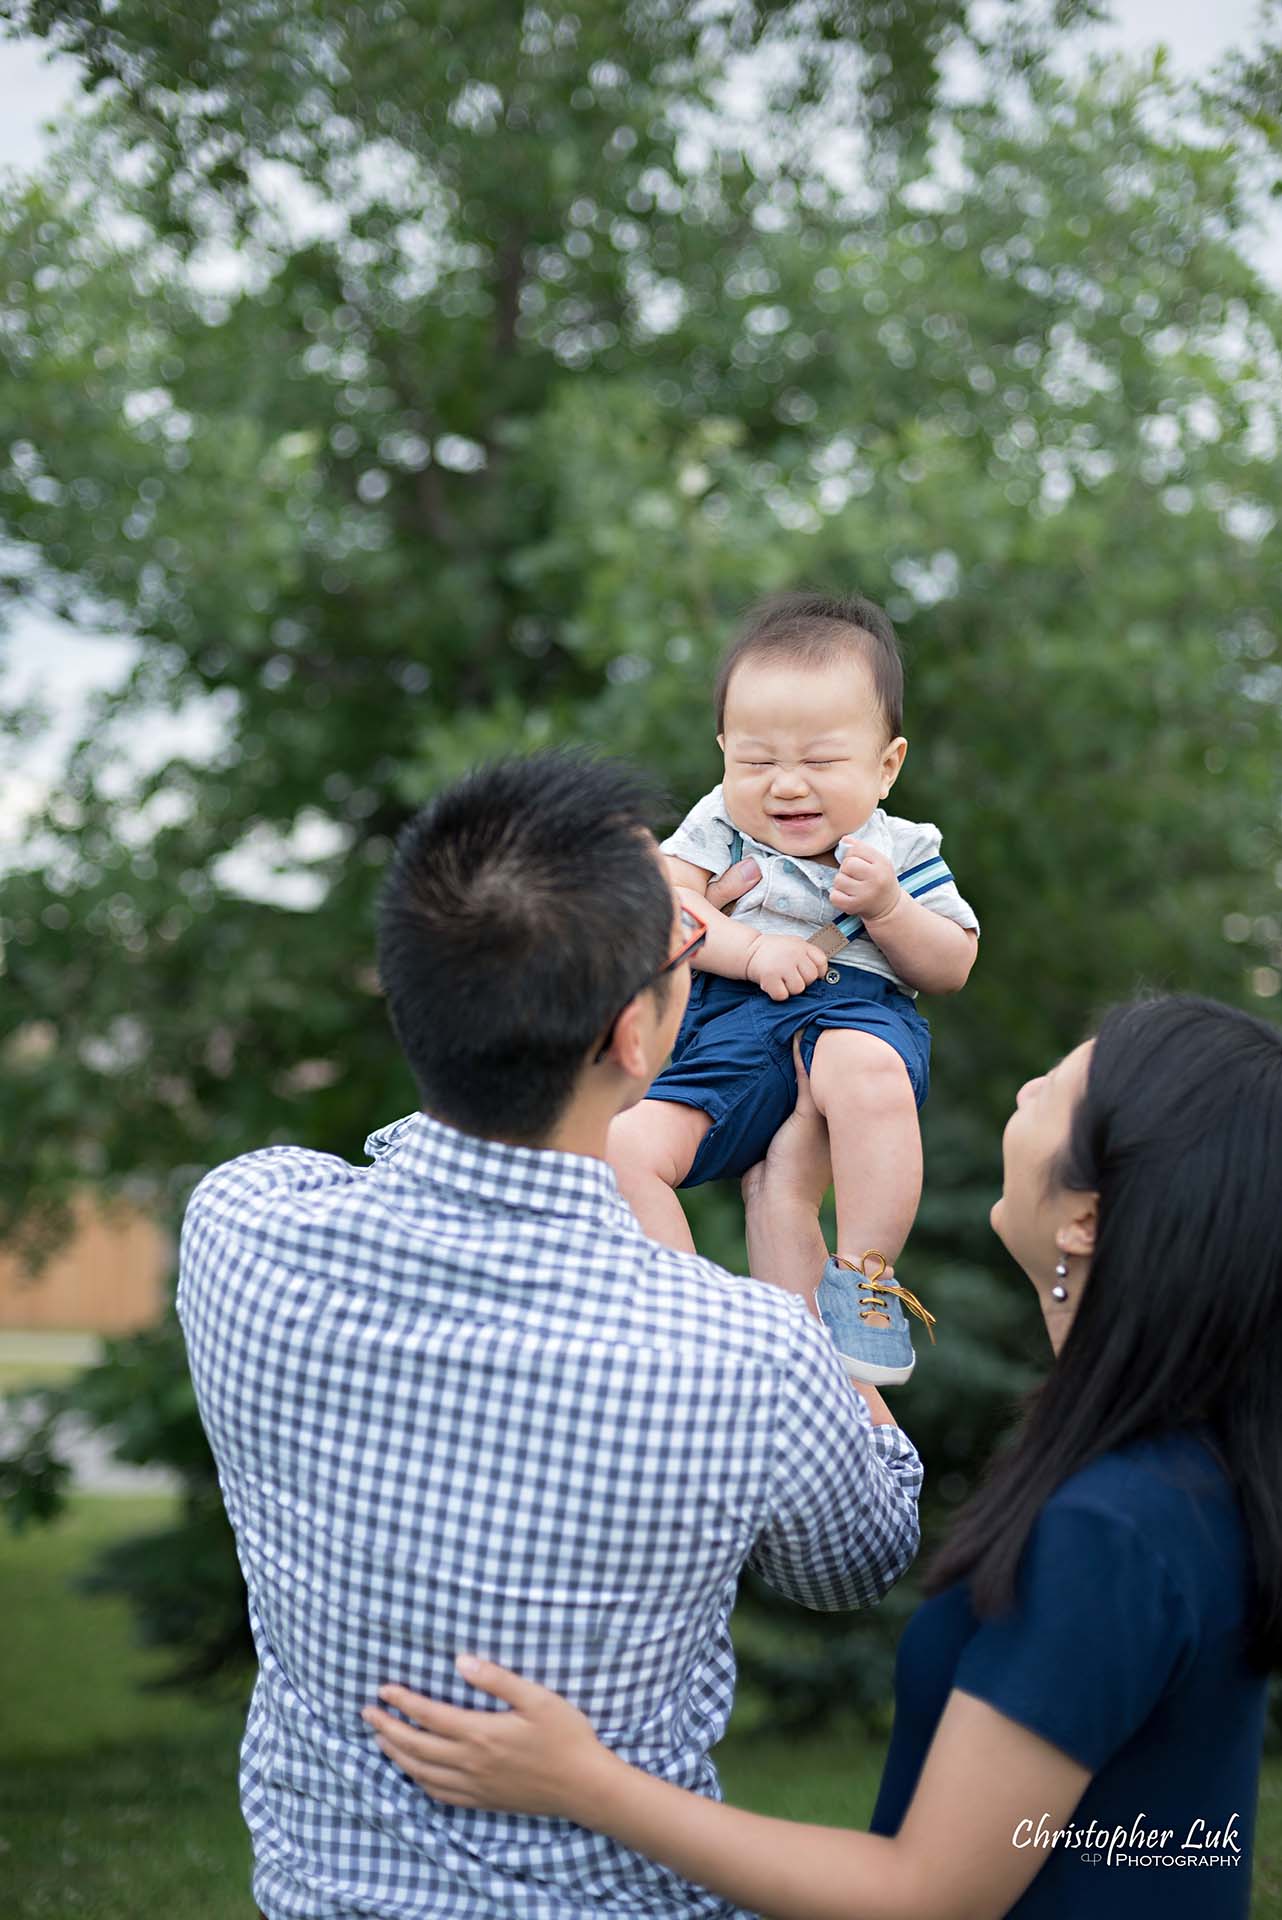 Christopher Luk Family Baby Wedding Photographer Richmond Hill Markham Toronto - Candid Natural Photojournalistic Father Mother Dad Mom Motherhood Fatherhood Baby Smile Cute Adorable Lifted Up Simba Lion King Squishy Face Smile